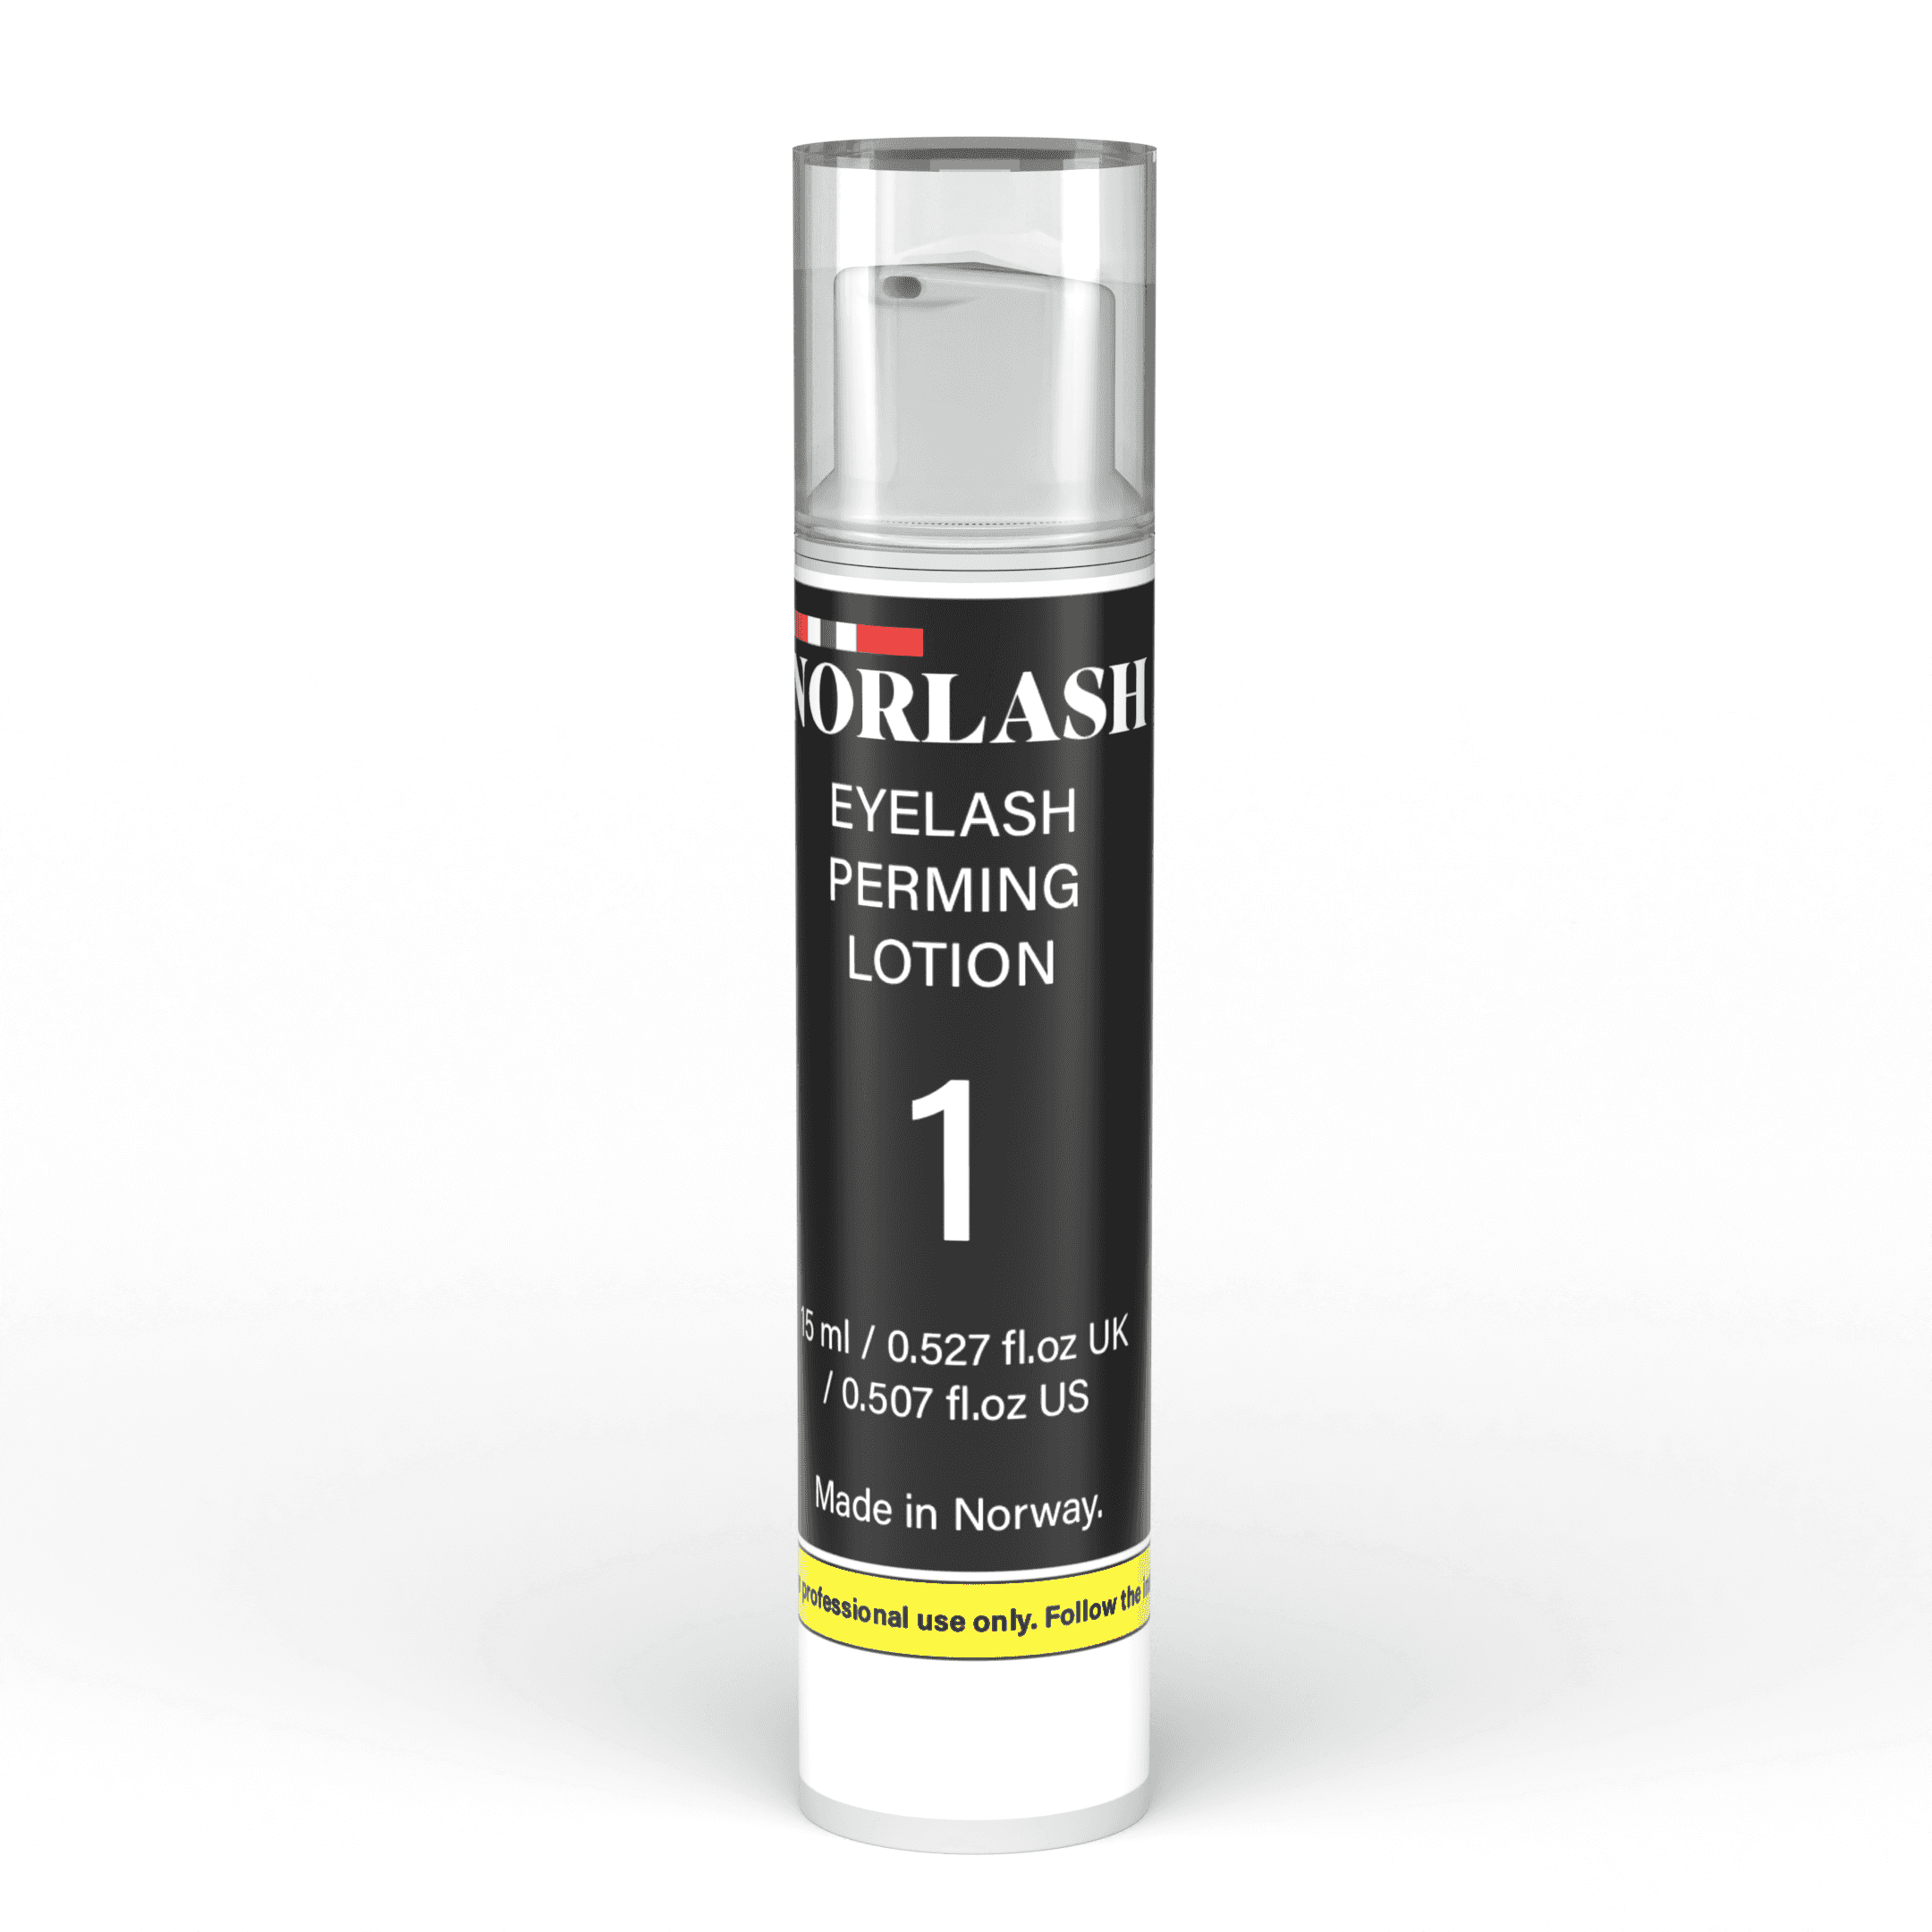 A bottle of NORLASH perming Lotion on a white background